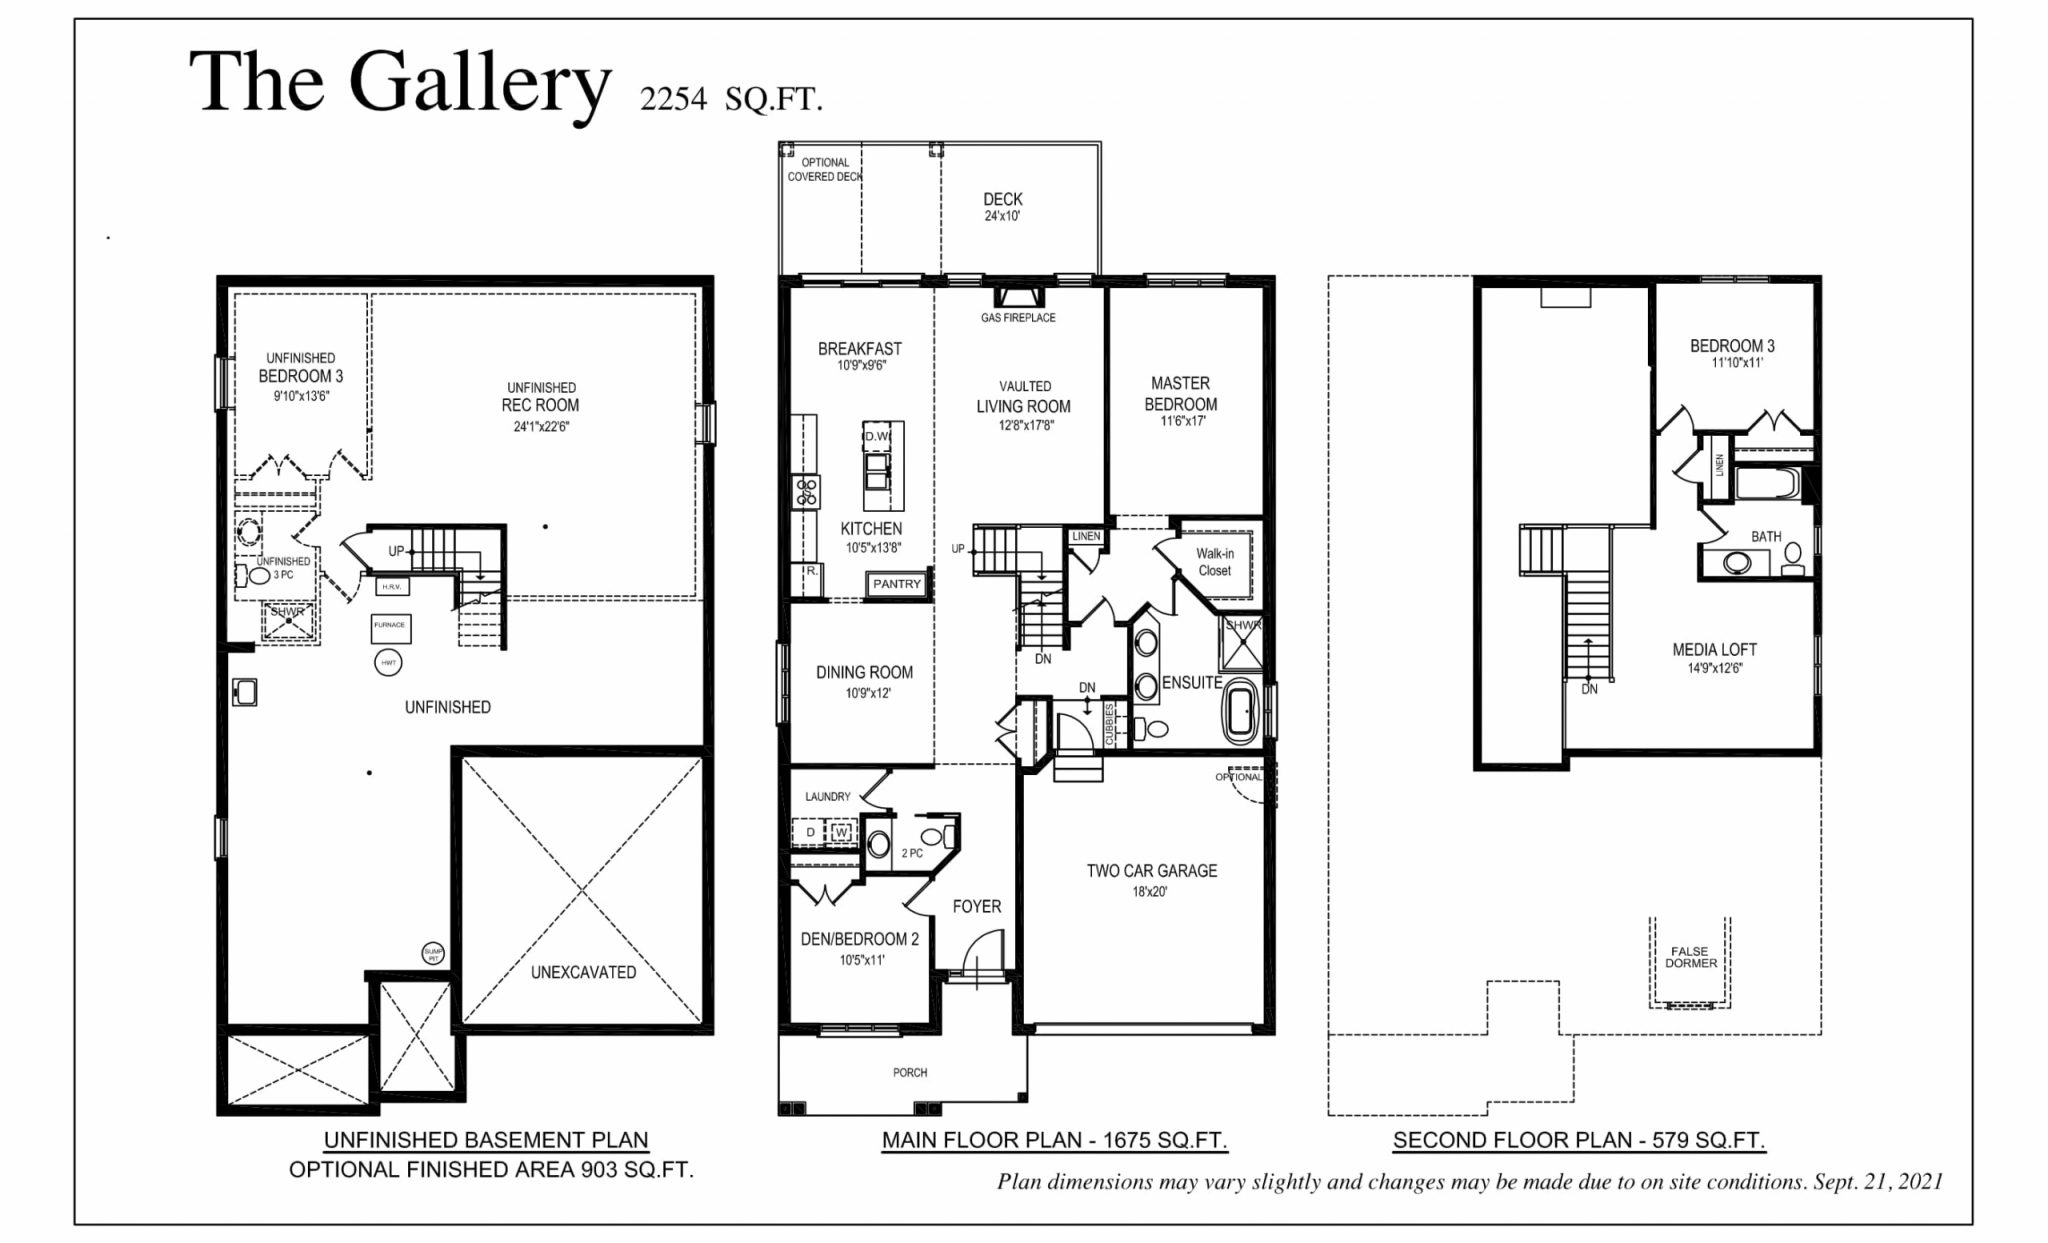  The Gallery  Floor Plan of Meadowlily with undefined beds